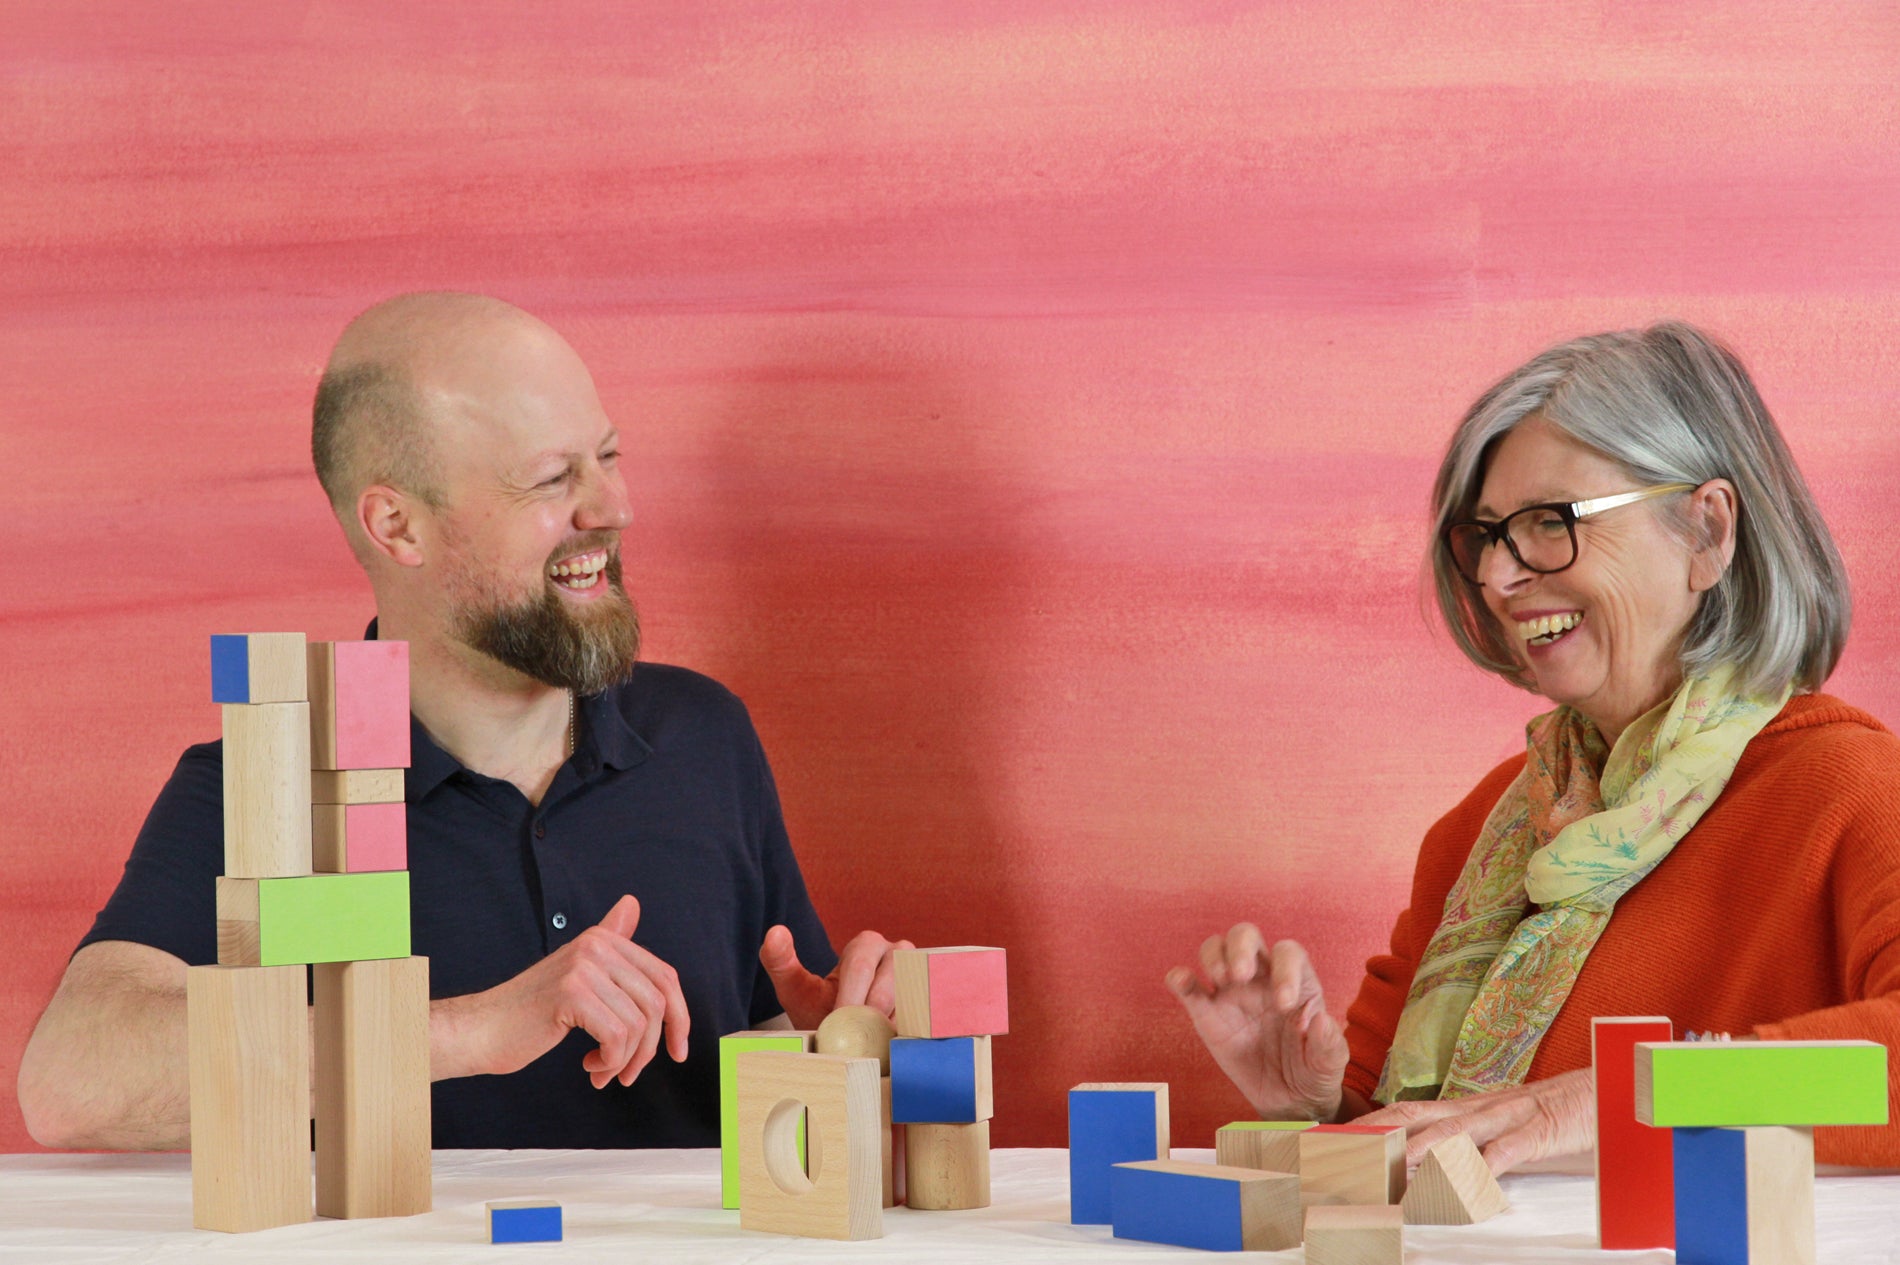 Two adults are shown playing FutureCity, a team building activity using blocks and photo cards.